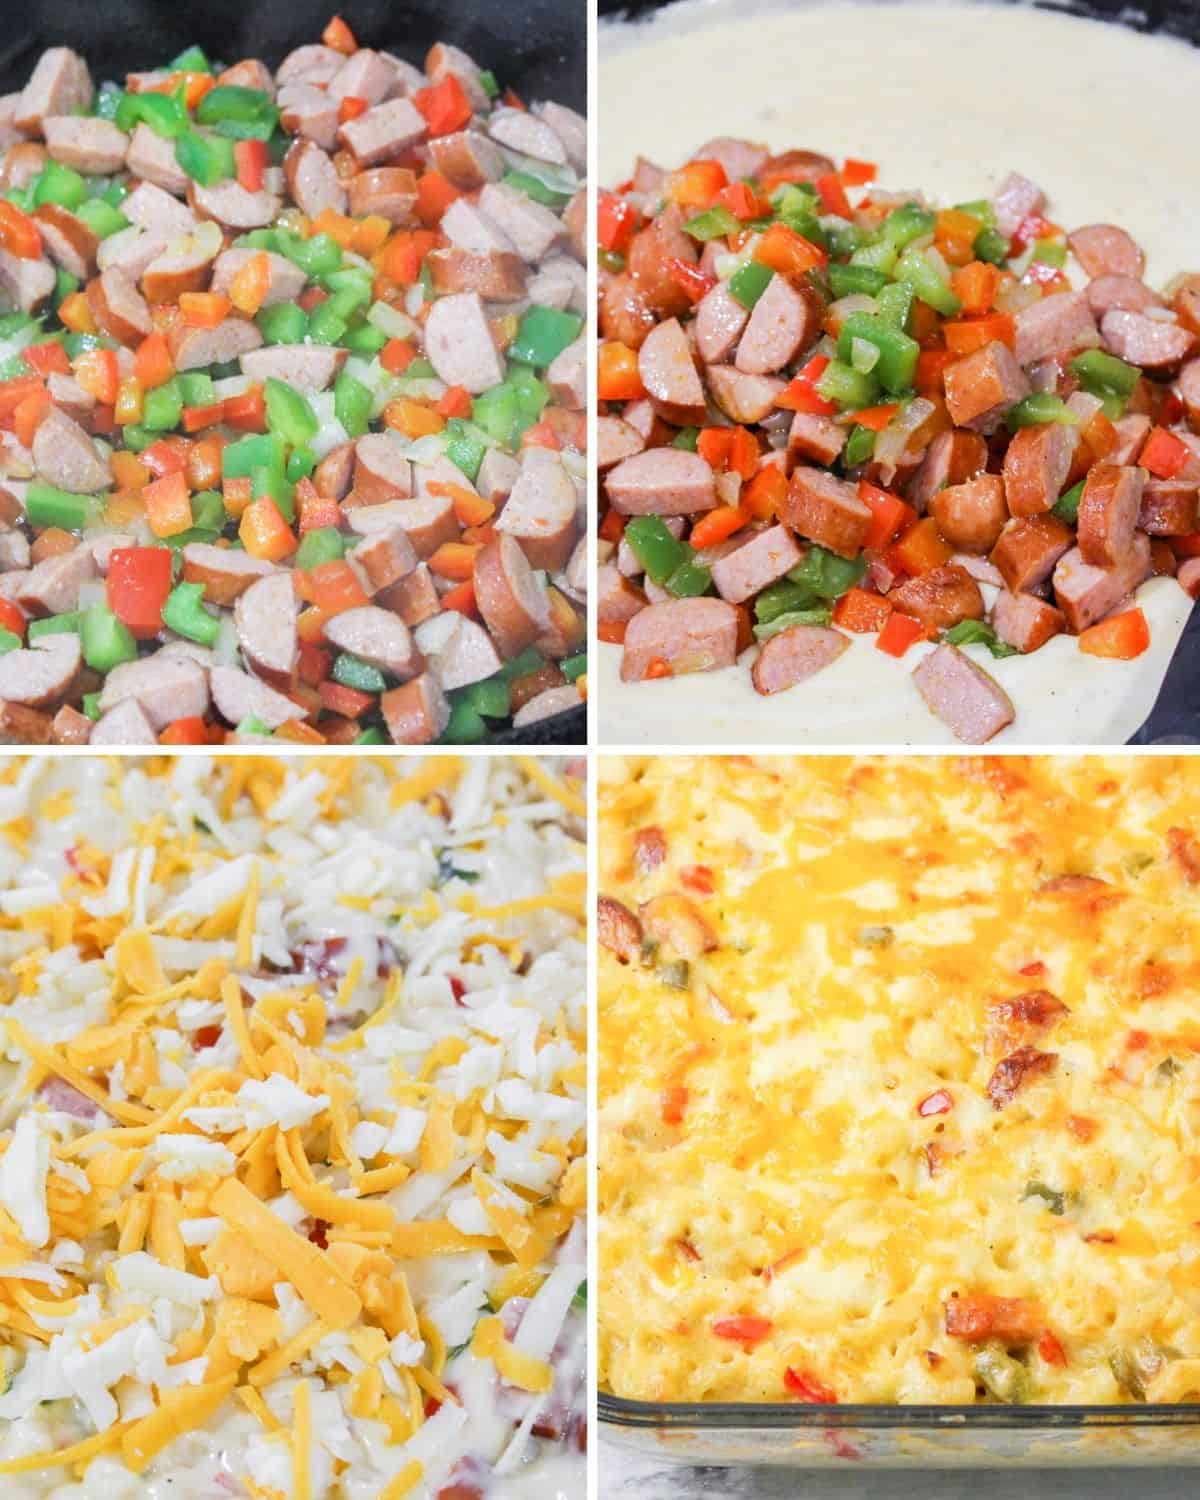 Step by step instructions to make cajun mac and cheese casserole.